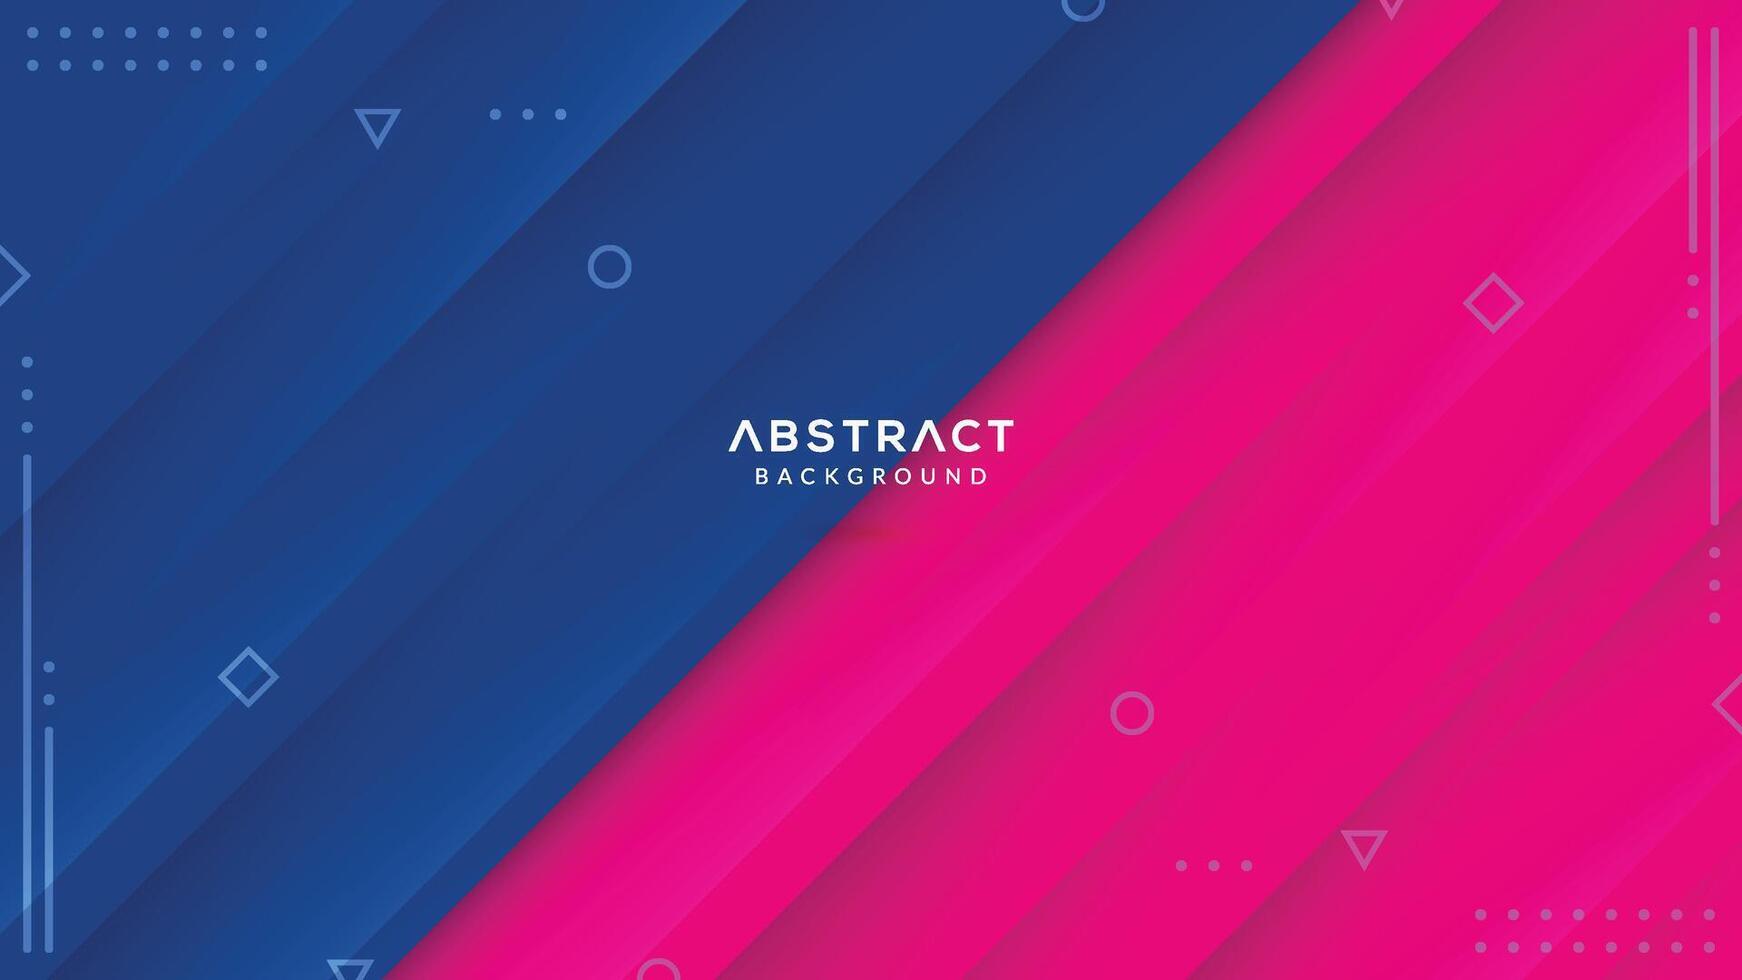 Abstract blue and pink papercut shape background vector